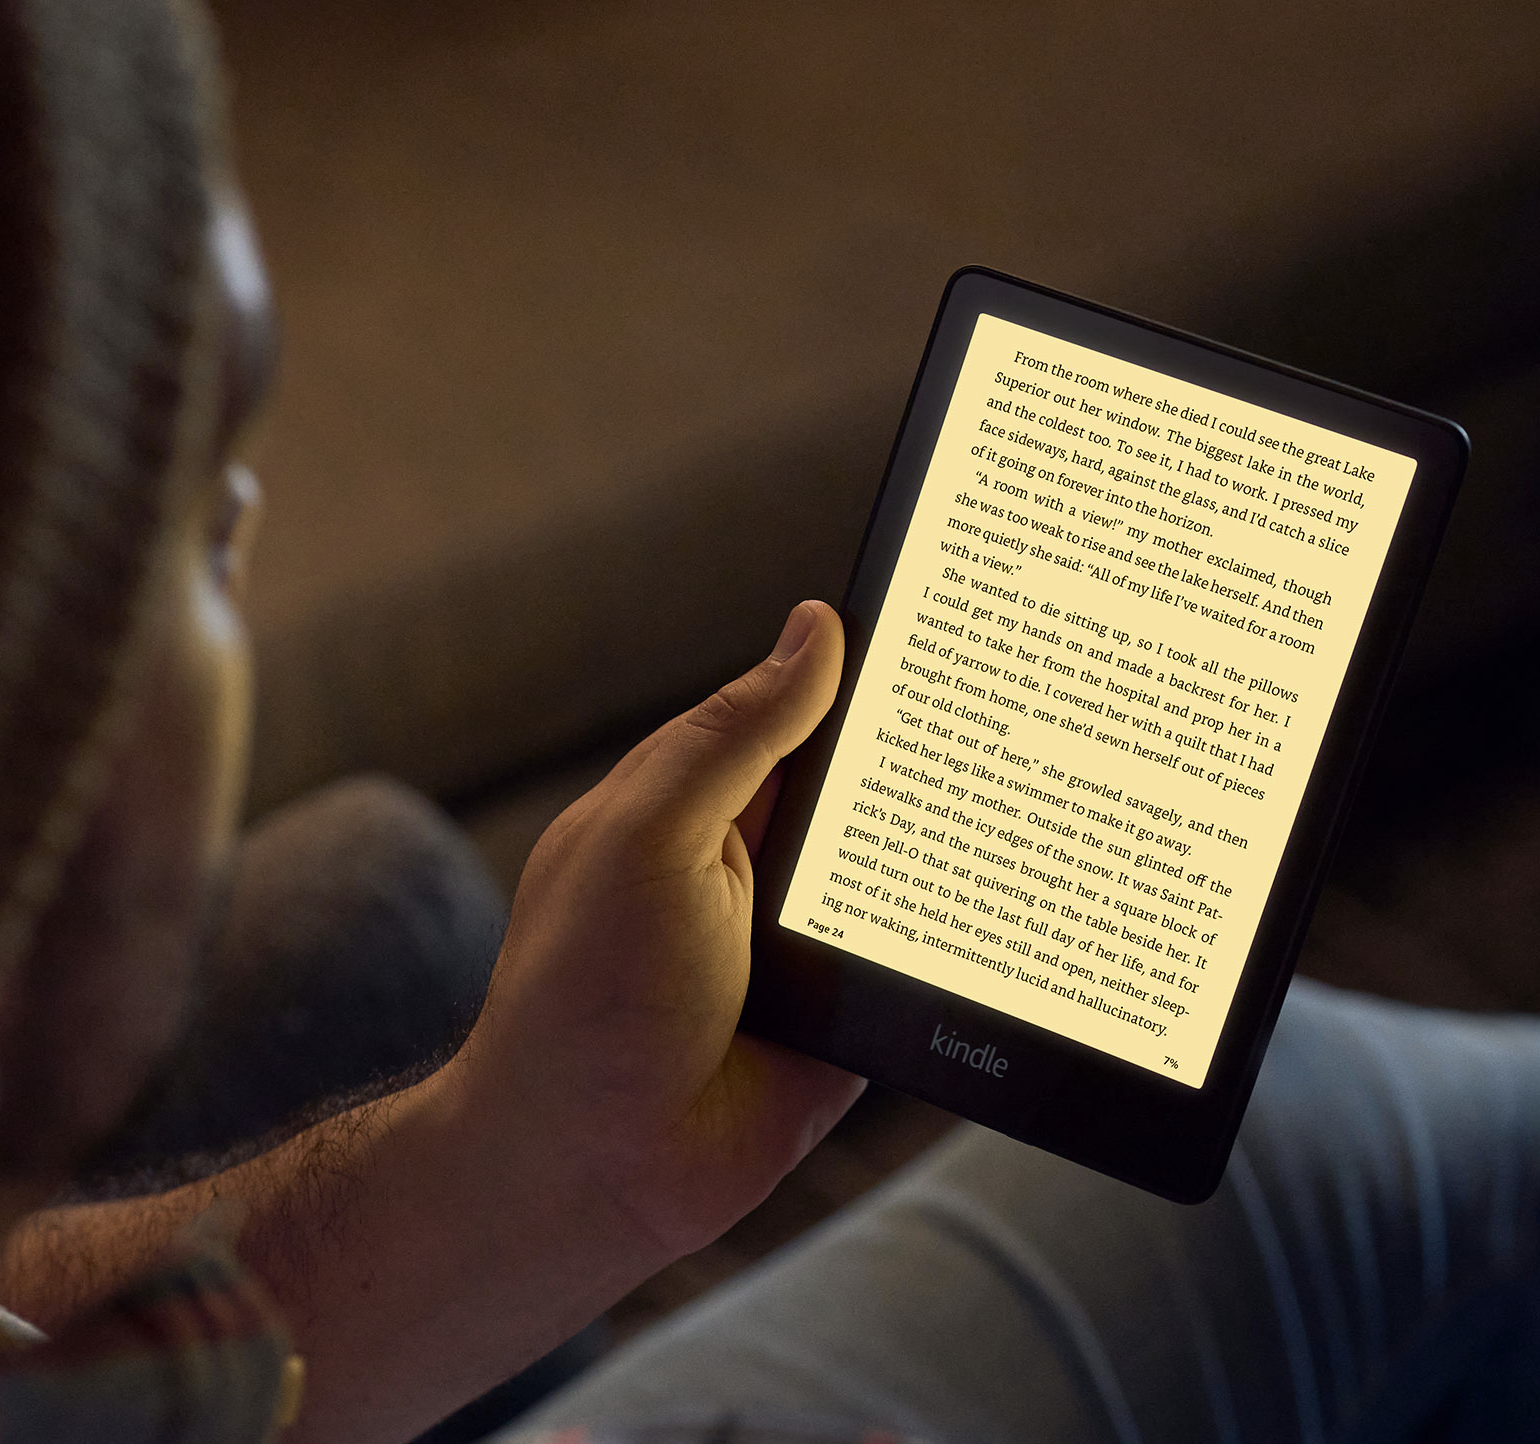 A person holding the Kindle illuminated with warm light